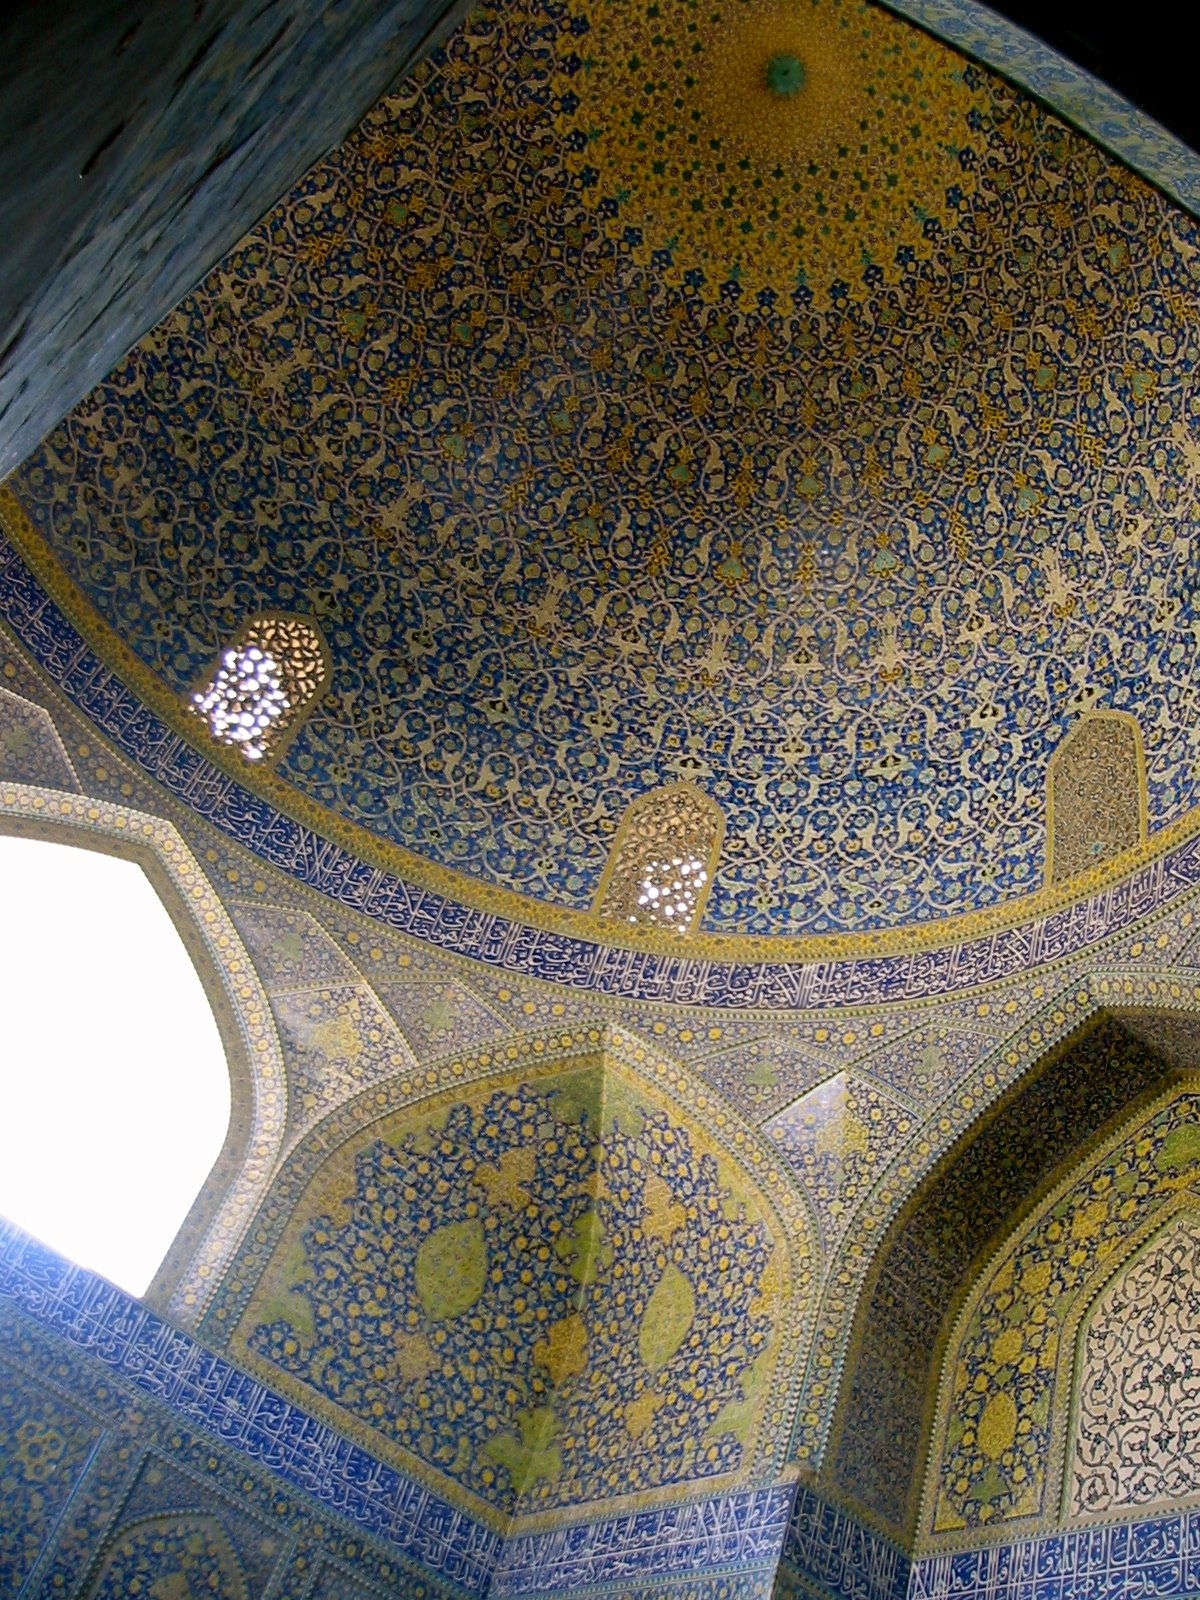 [Ceiling+of+Mosque.jpg]